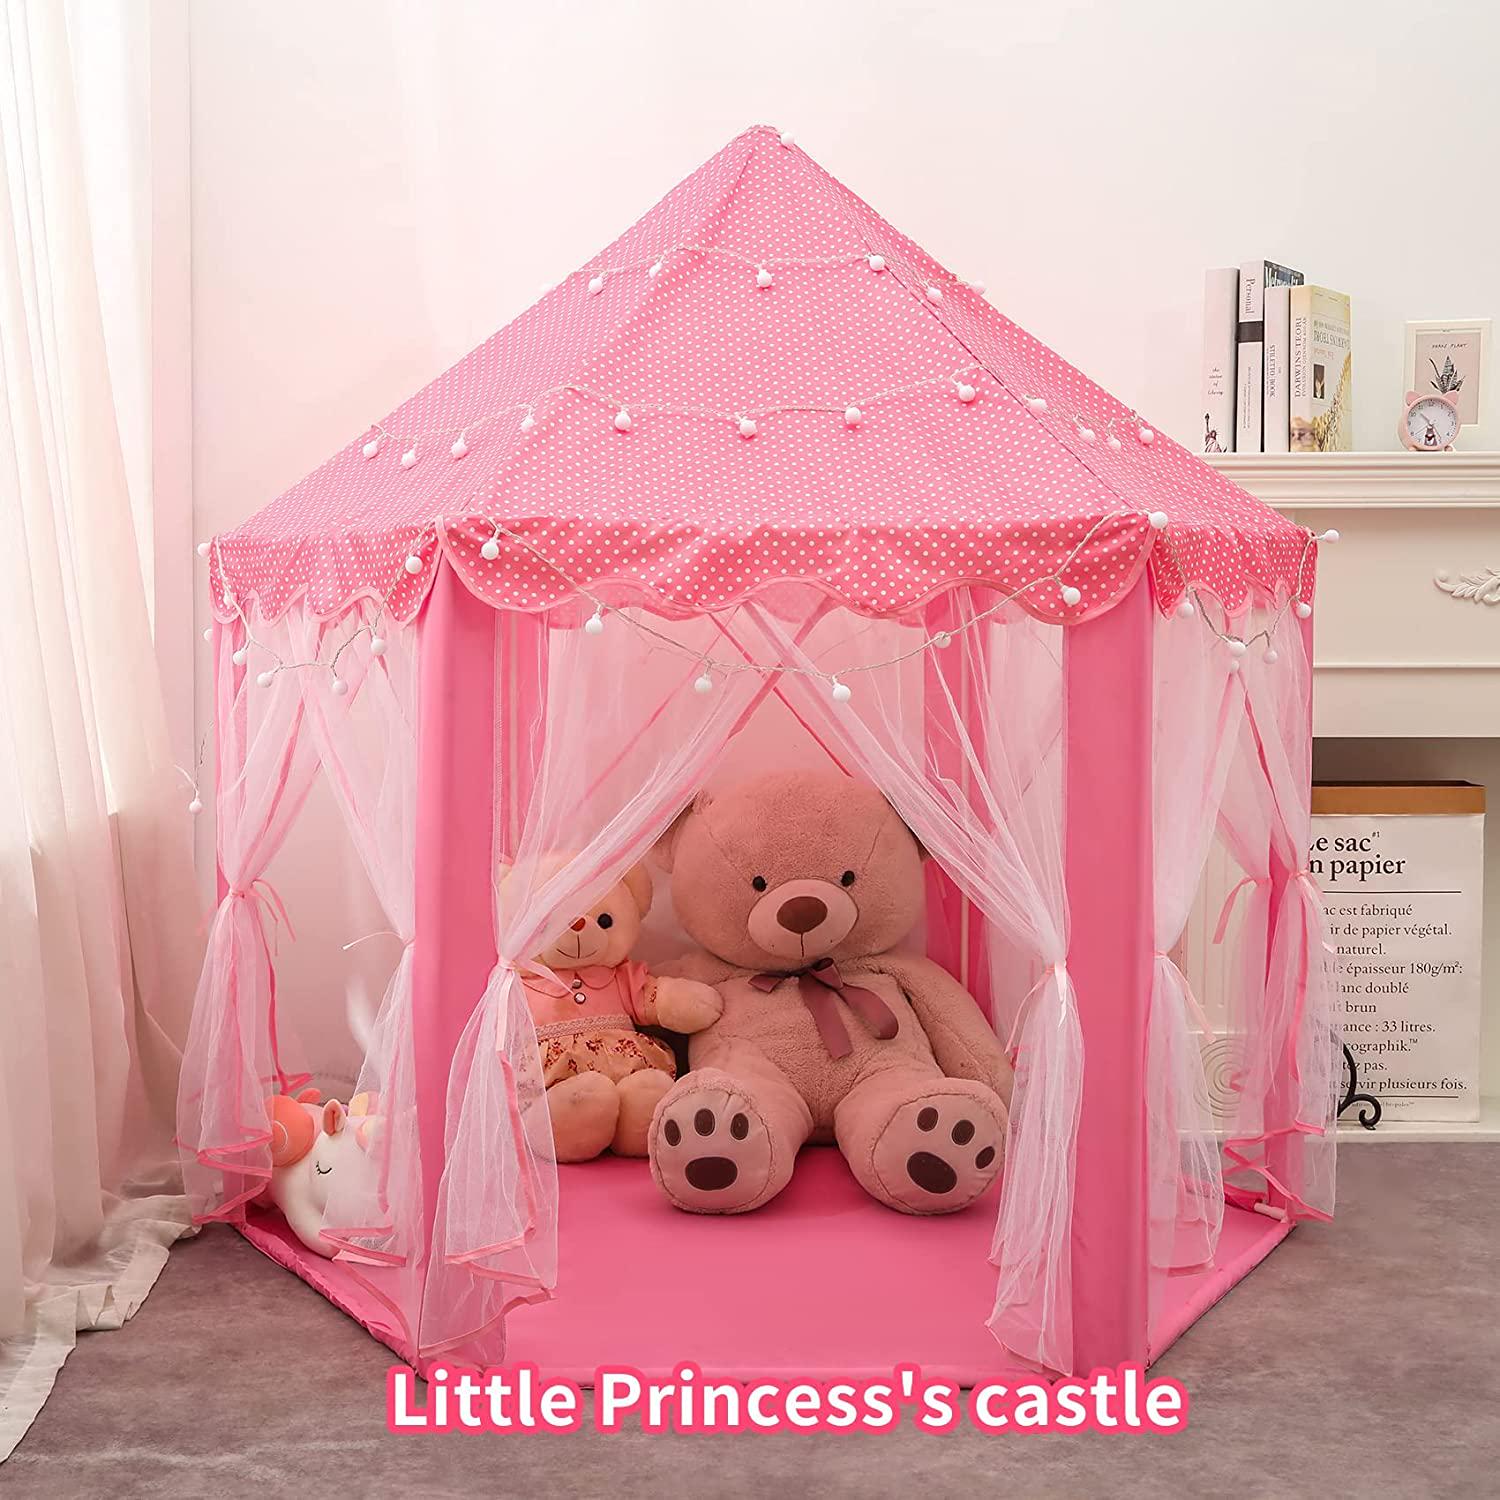 Dmqsfig, Kids Princess Tent Playhouse Girls Toys Gifts Children Castle with 33ft Colorful Ball LED Lights Indoor Outdoor Games